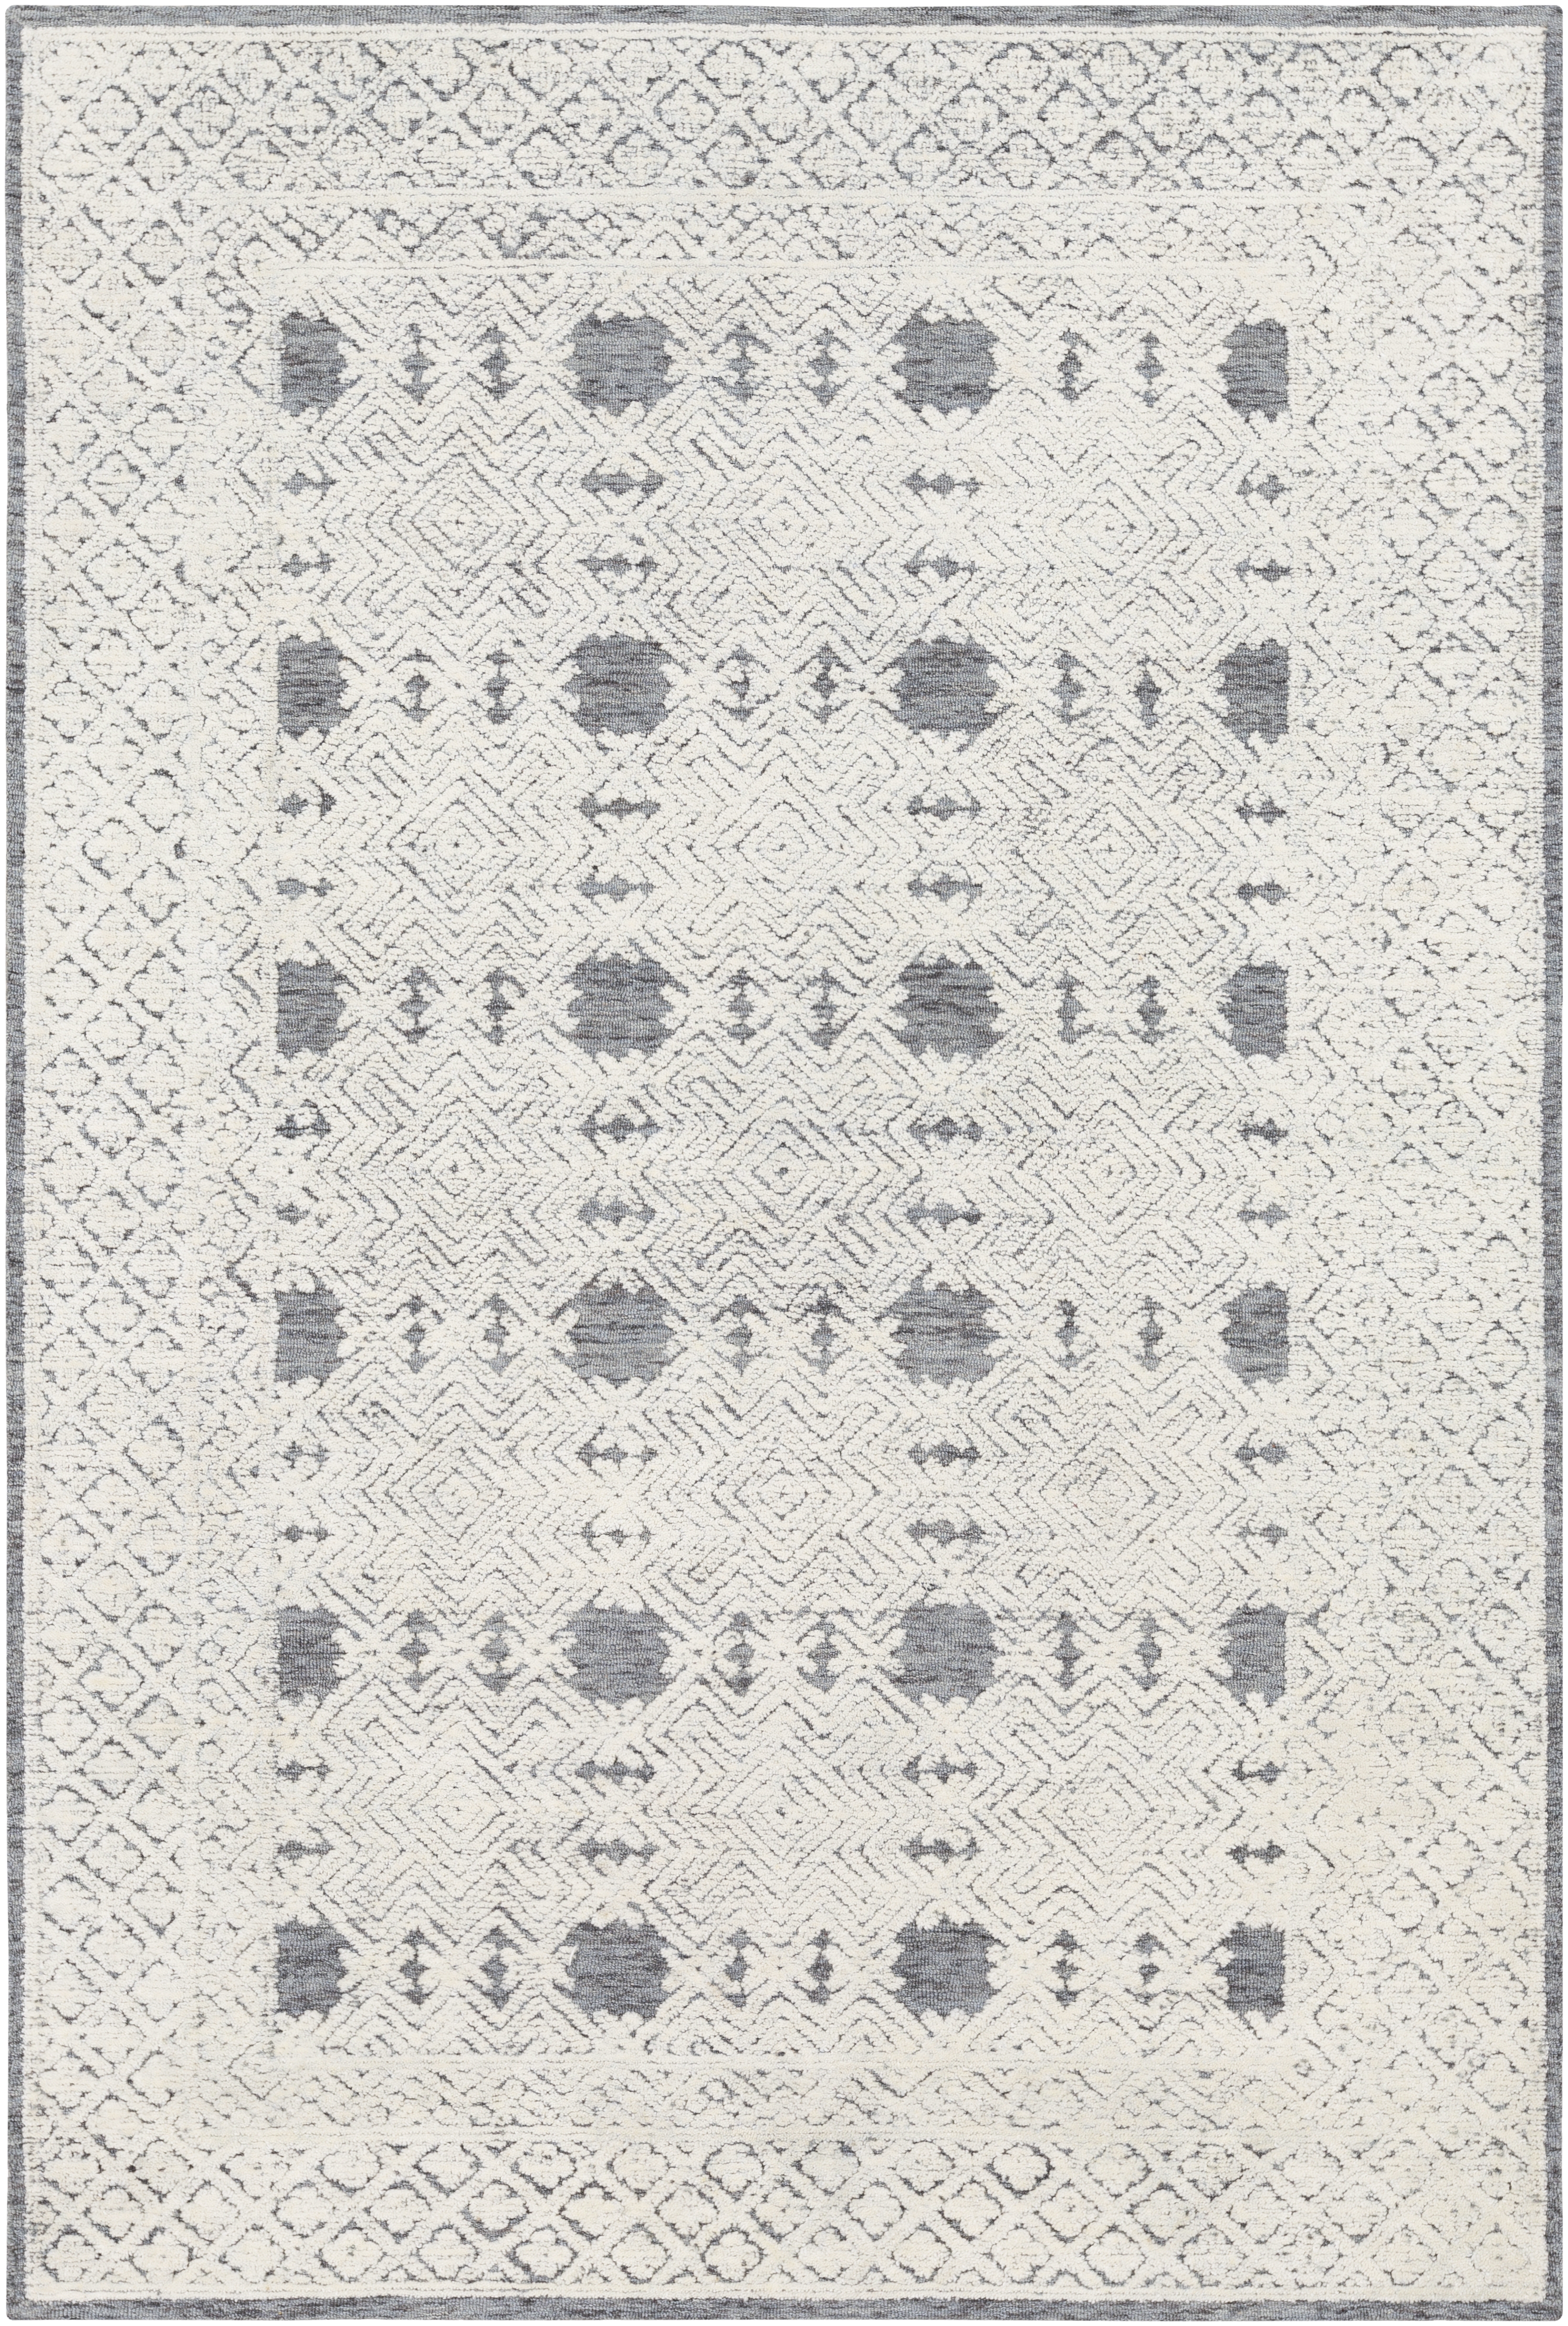 Louvre Rug, 6' x 9' - Image 0